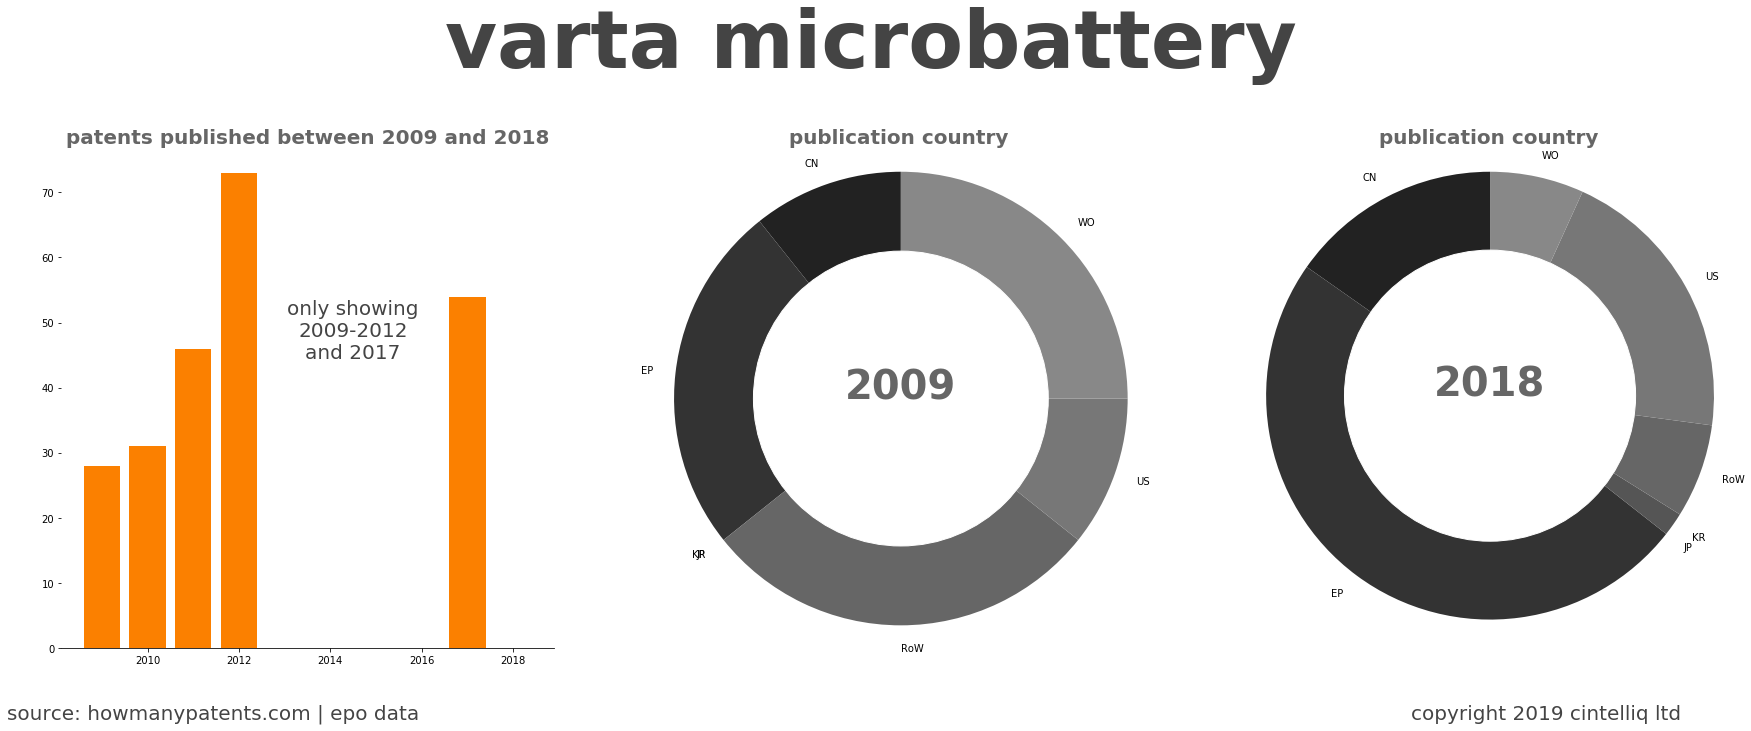 summary of patents for Varta Microbattery